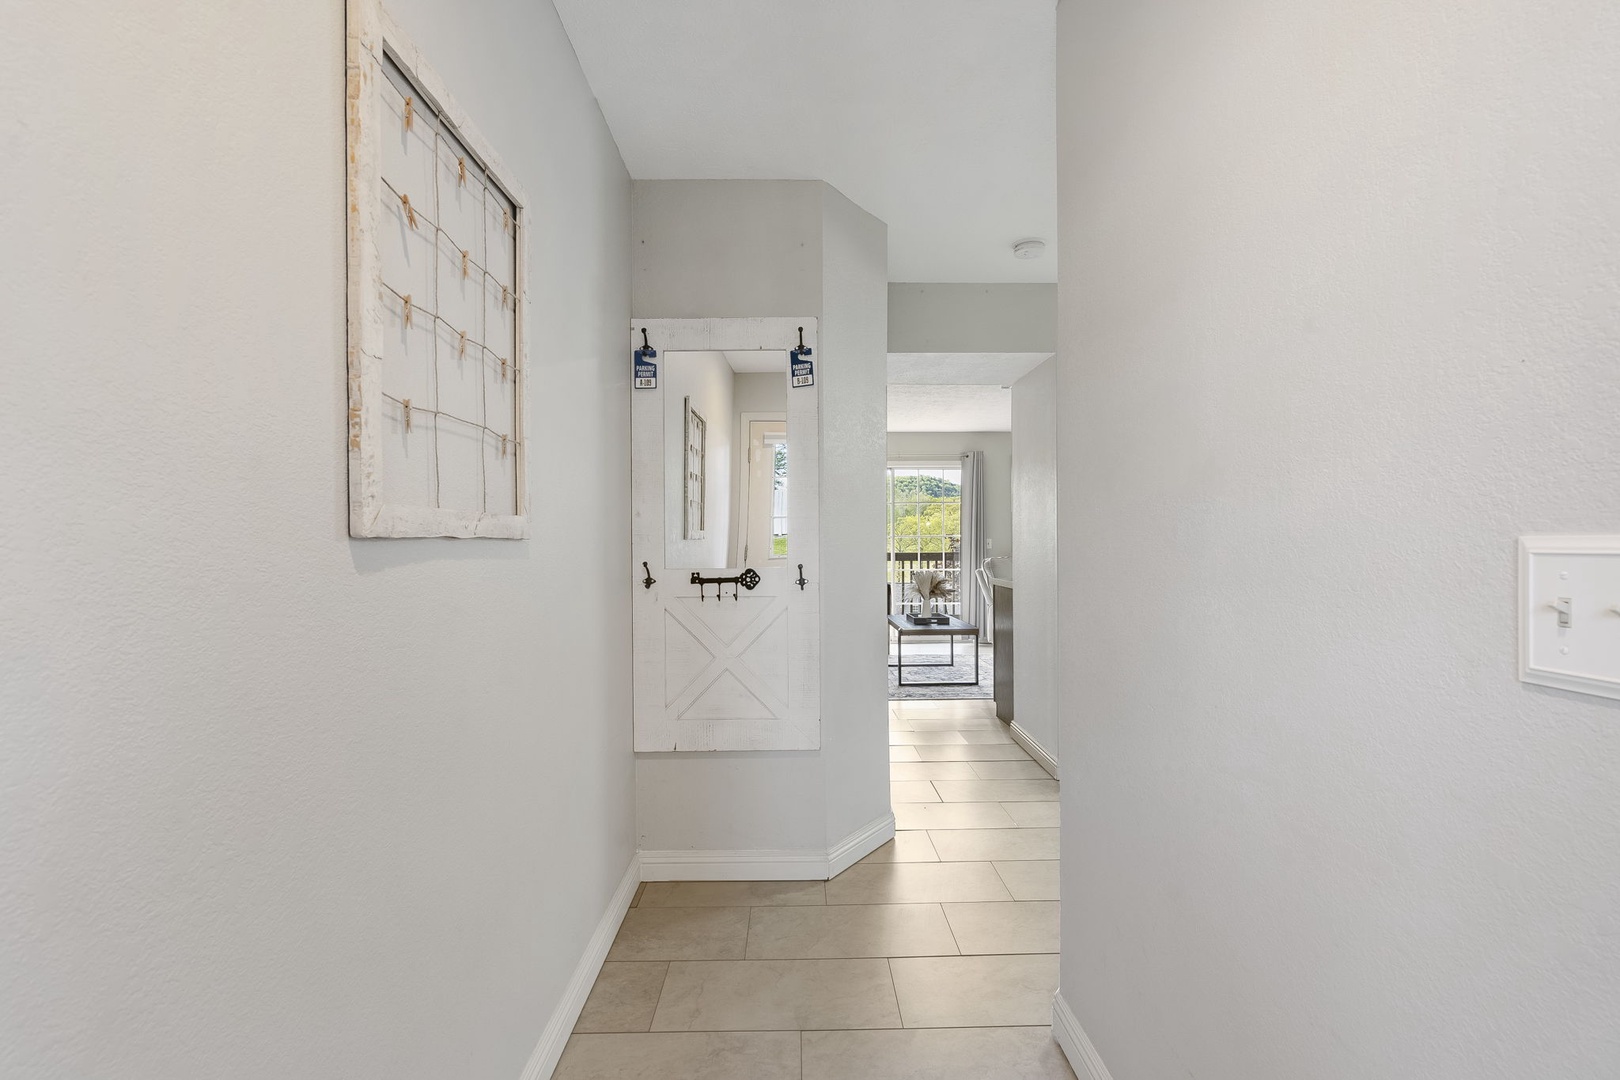 An airy, spacious entry hallway will welcome you home